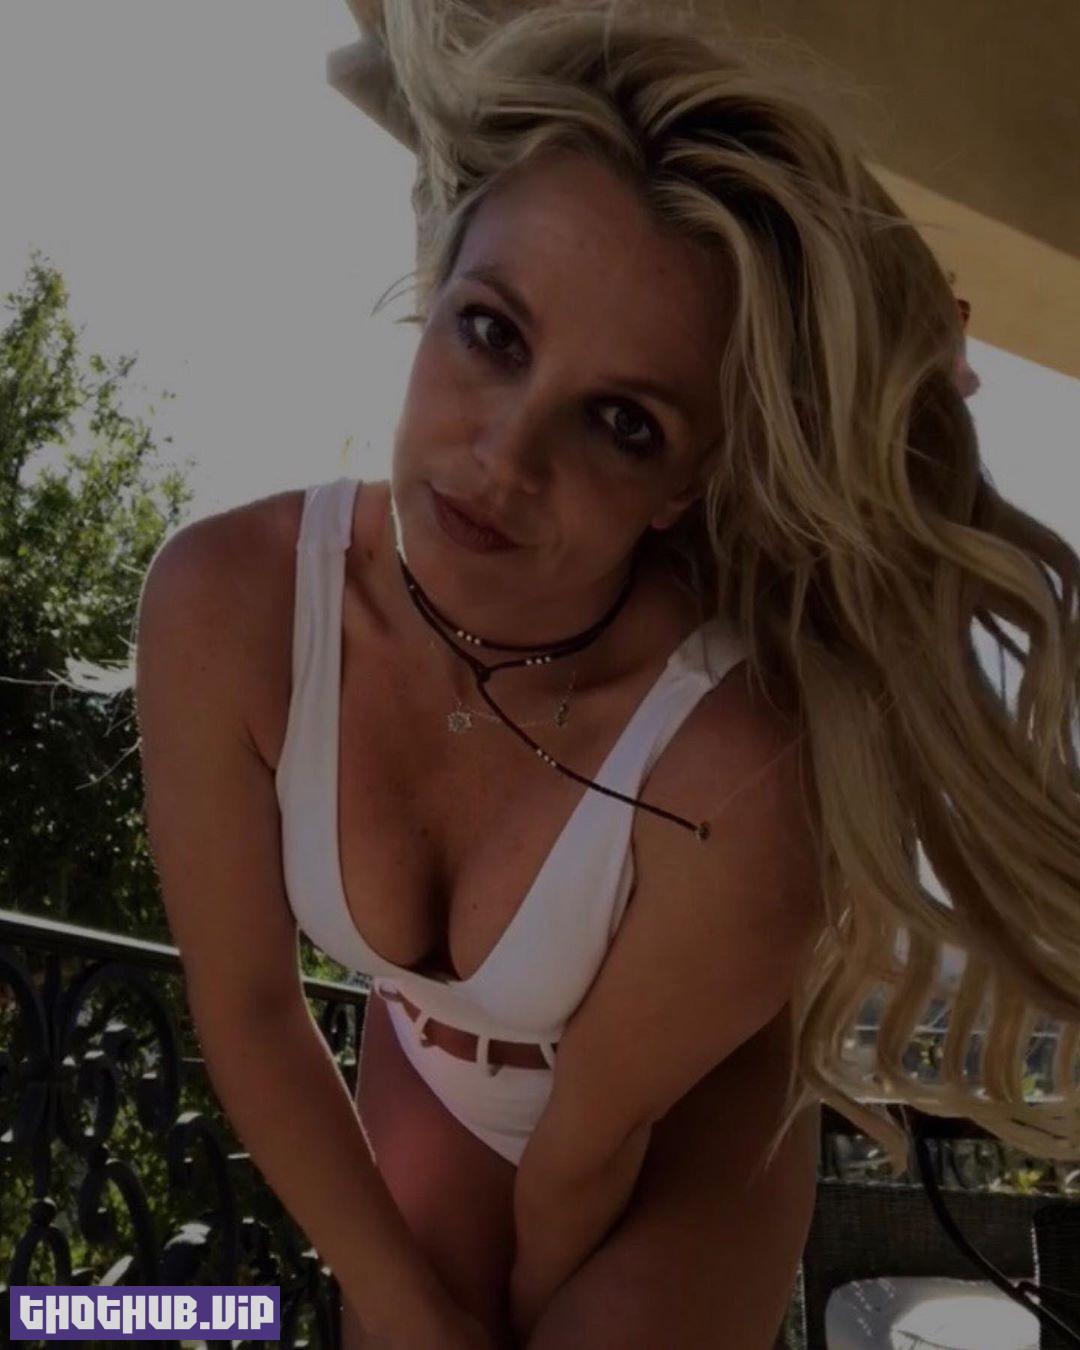 1687053707 668 Britney Spears The Fappening Sexy 43 Photos Videos